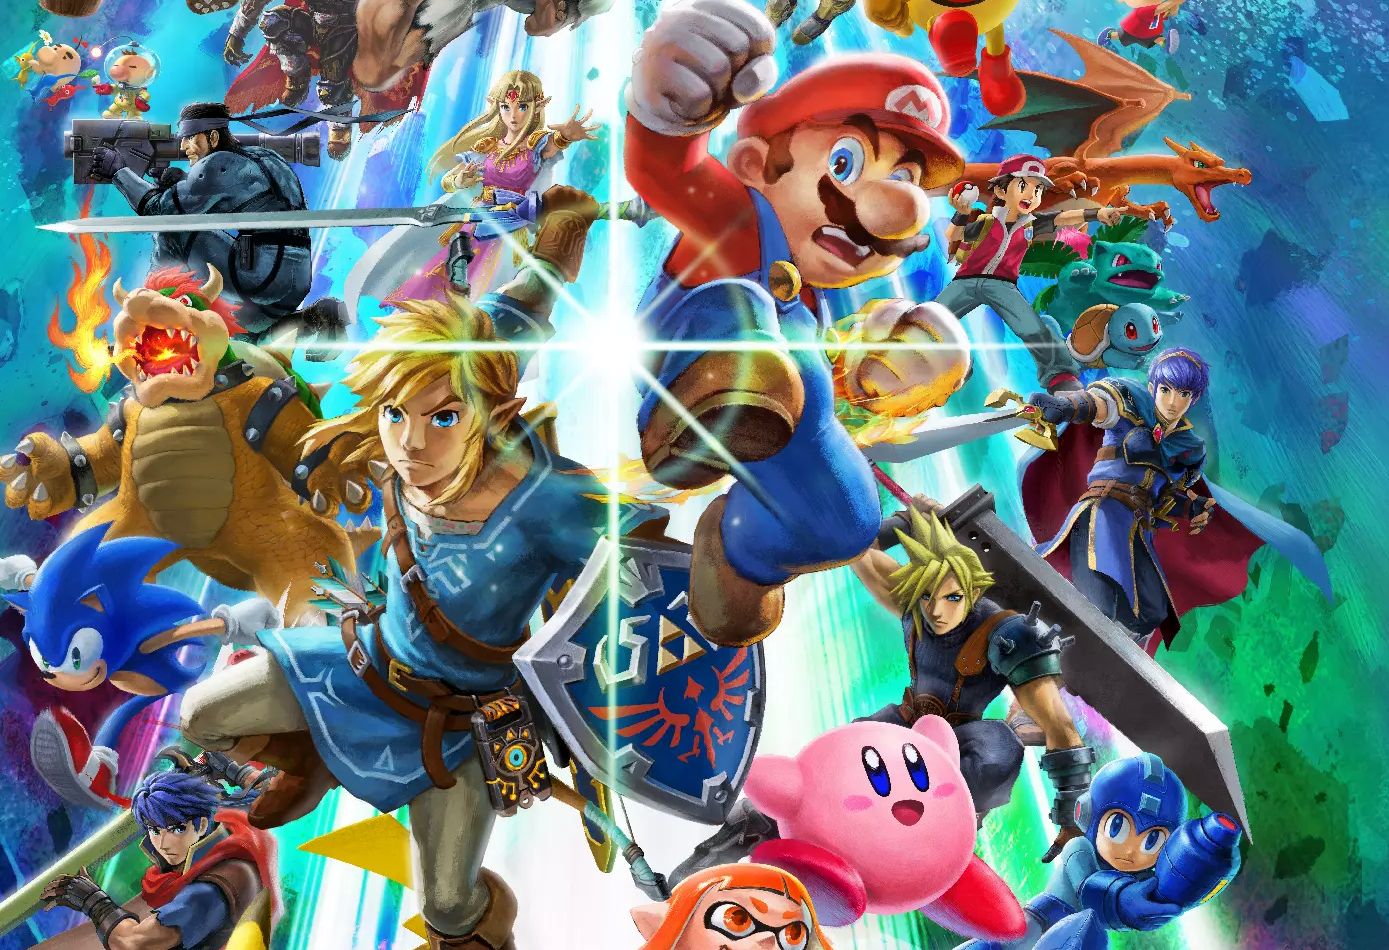 Image for Super Smash Bros. Ultimate livestream to show new DLC character